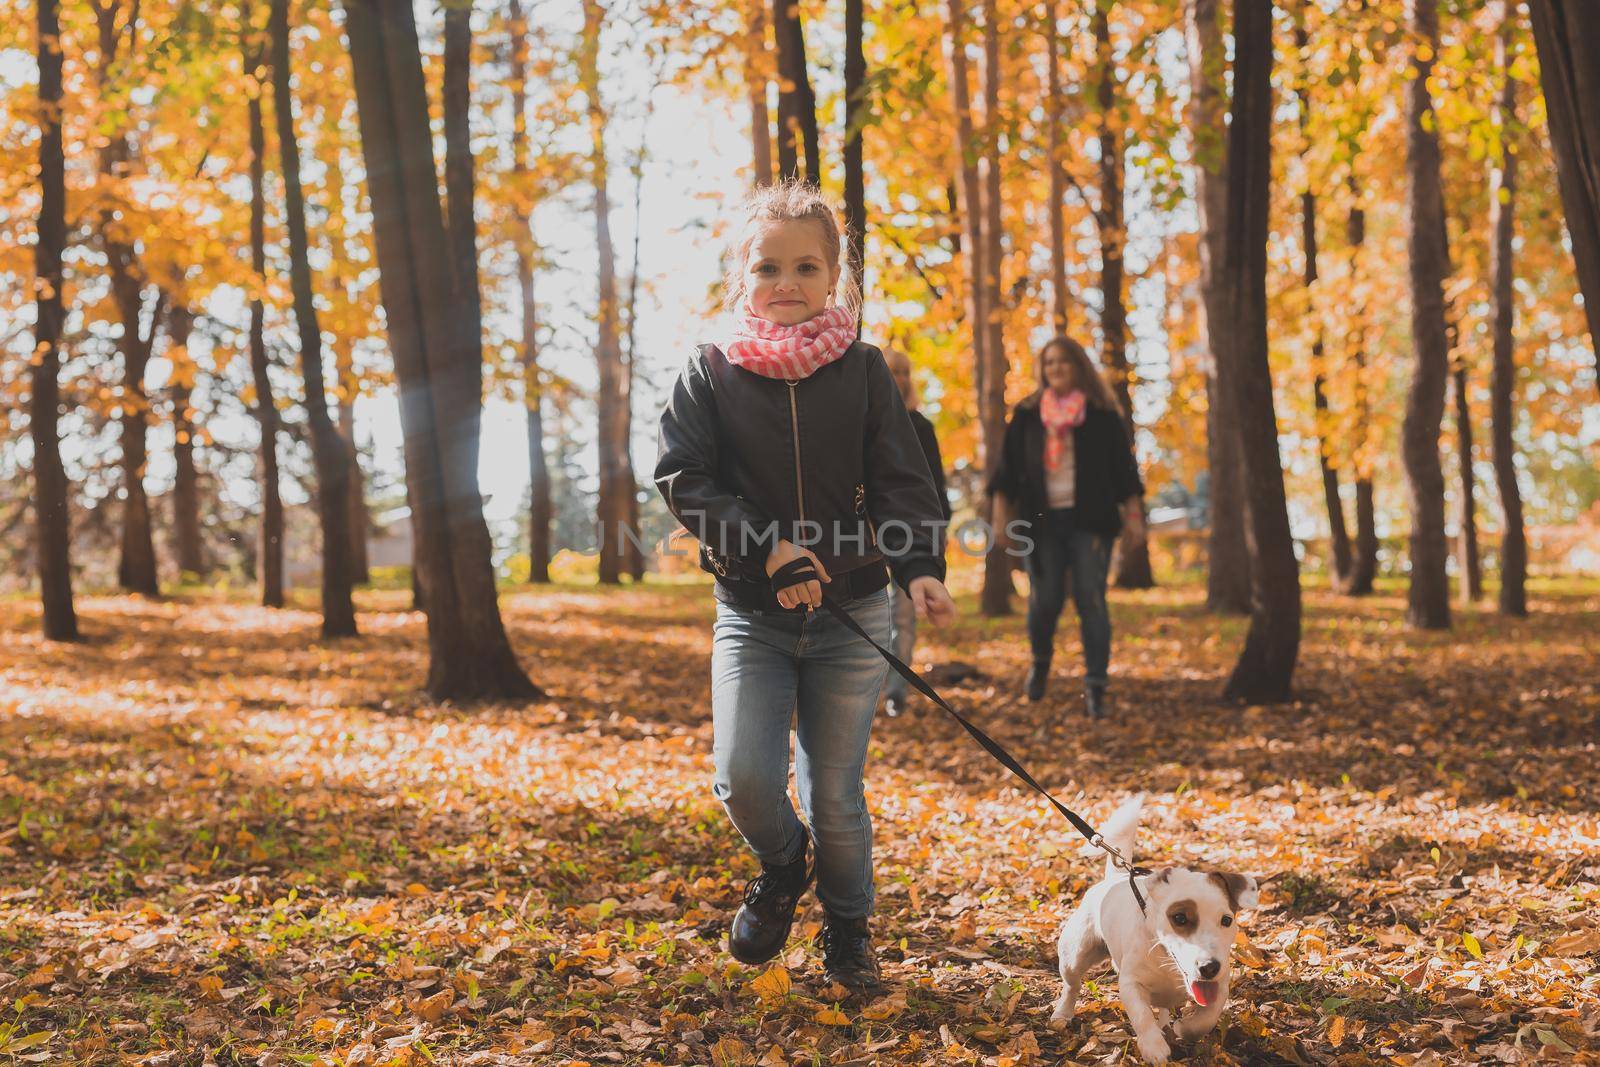 Little girl running with her dog jack russell terrier among autumn leaves. Mother and grandmother walks behind.